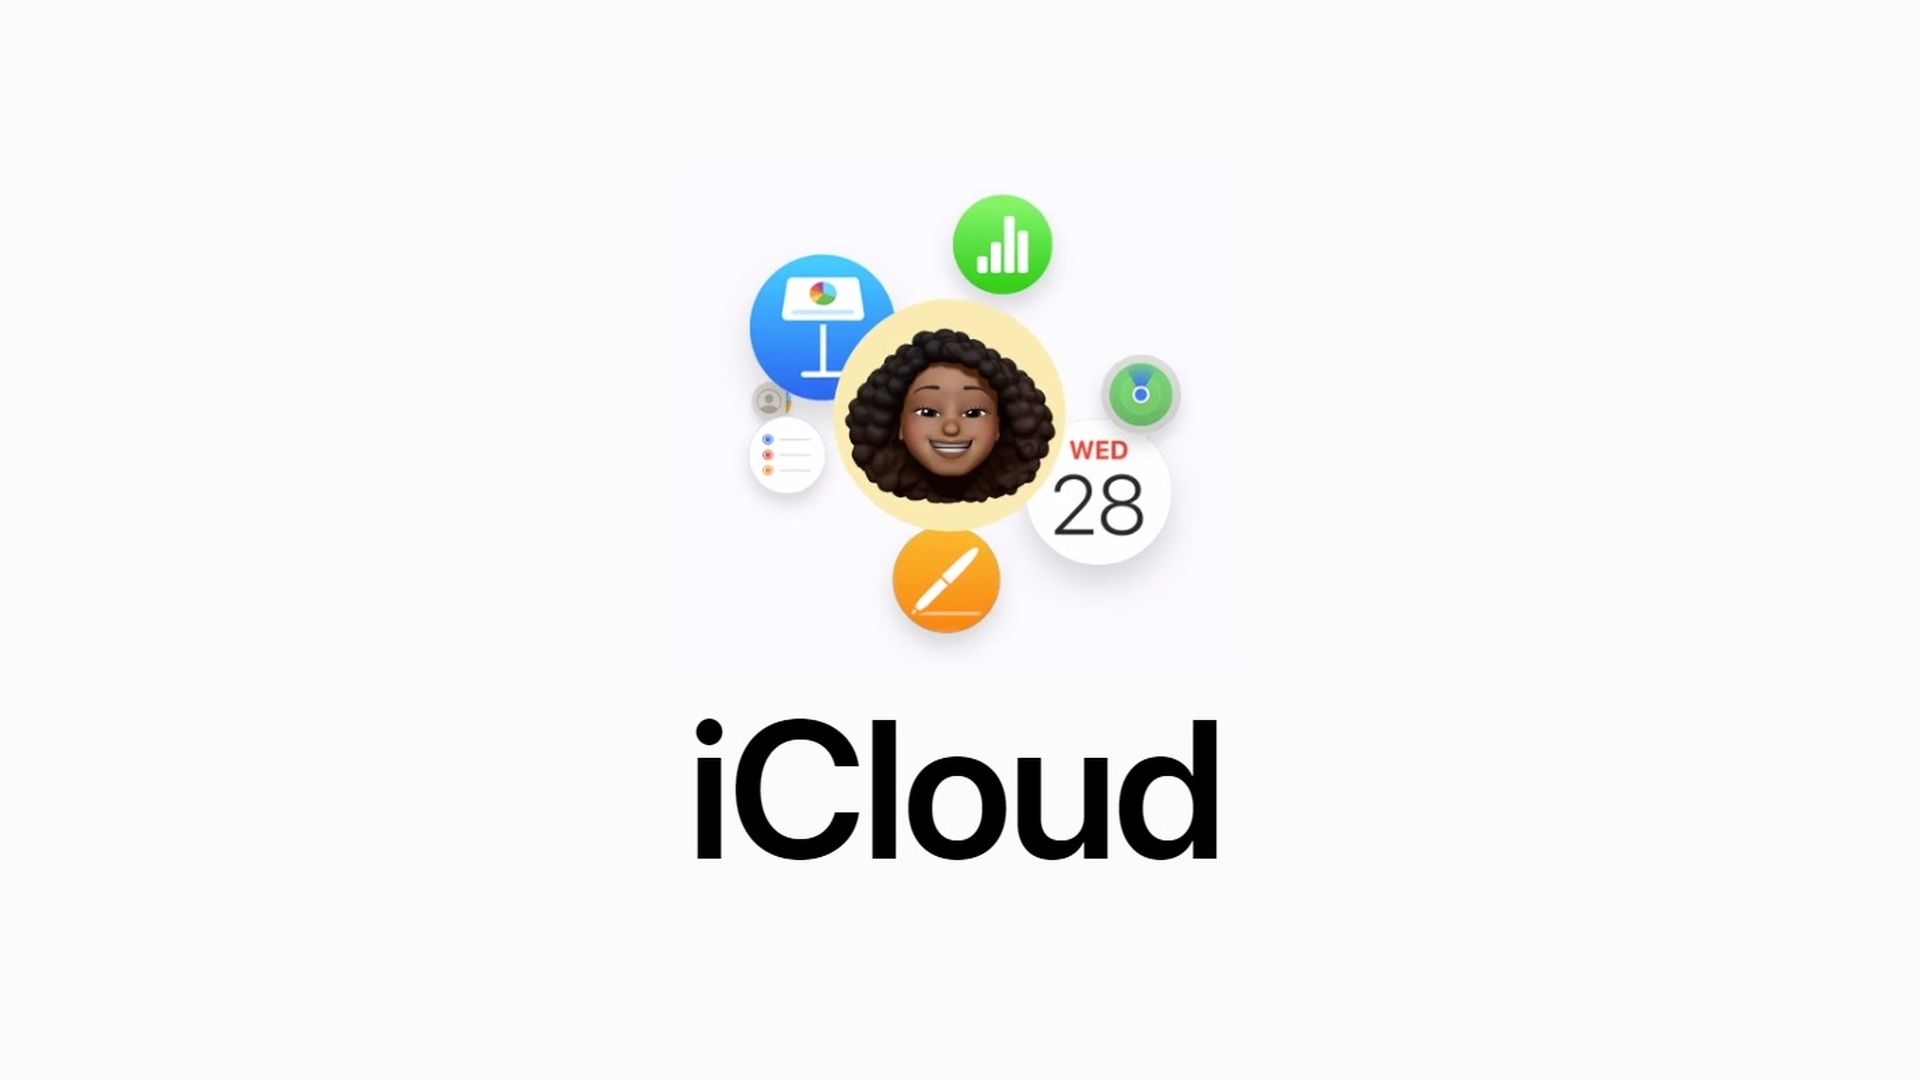 Icons of various Apple apps above the iCloud logo